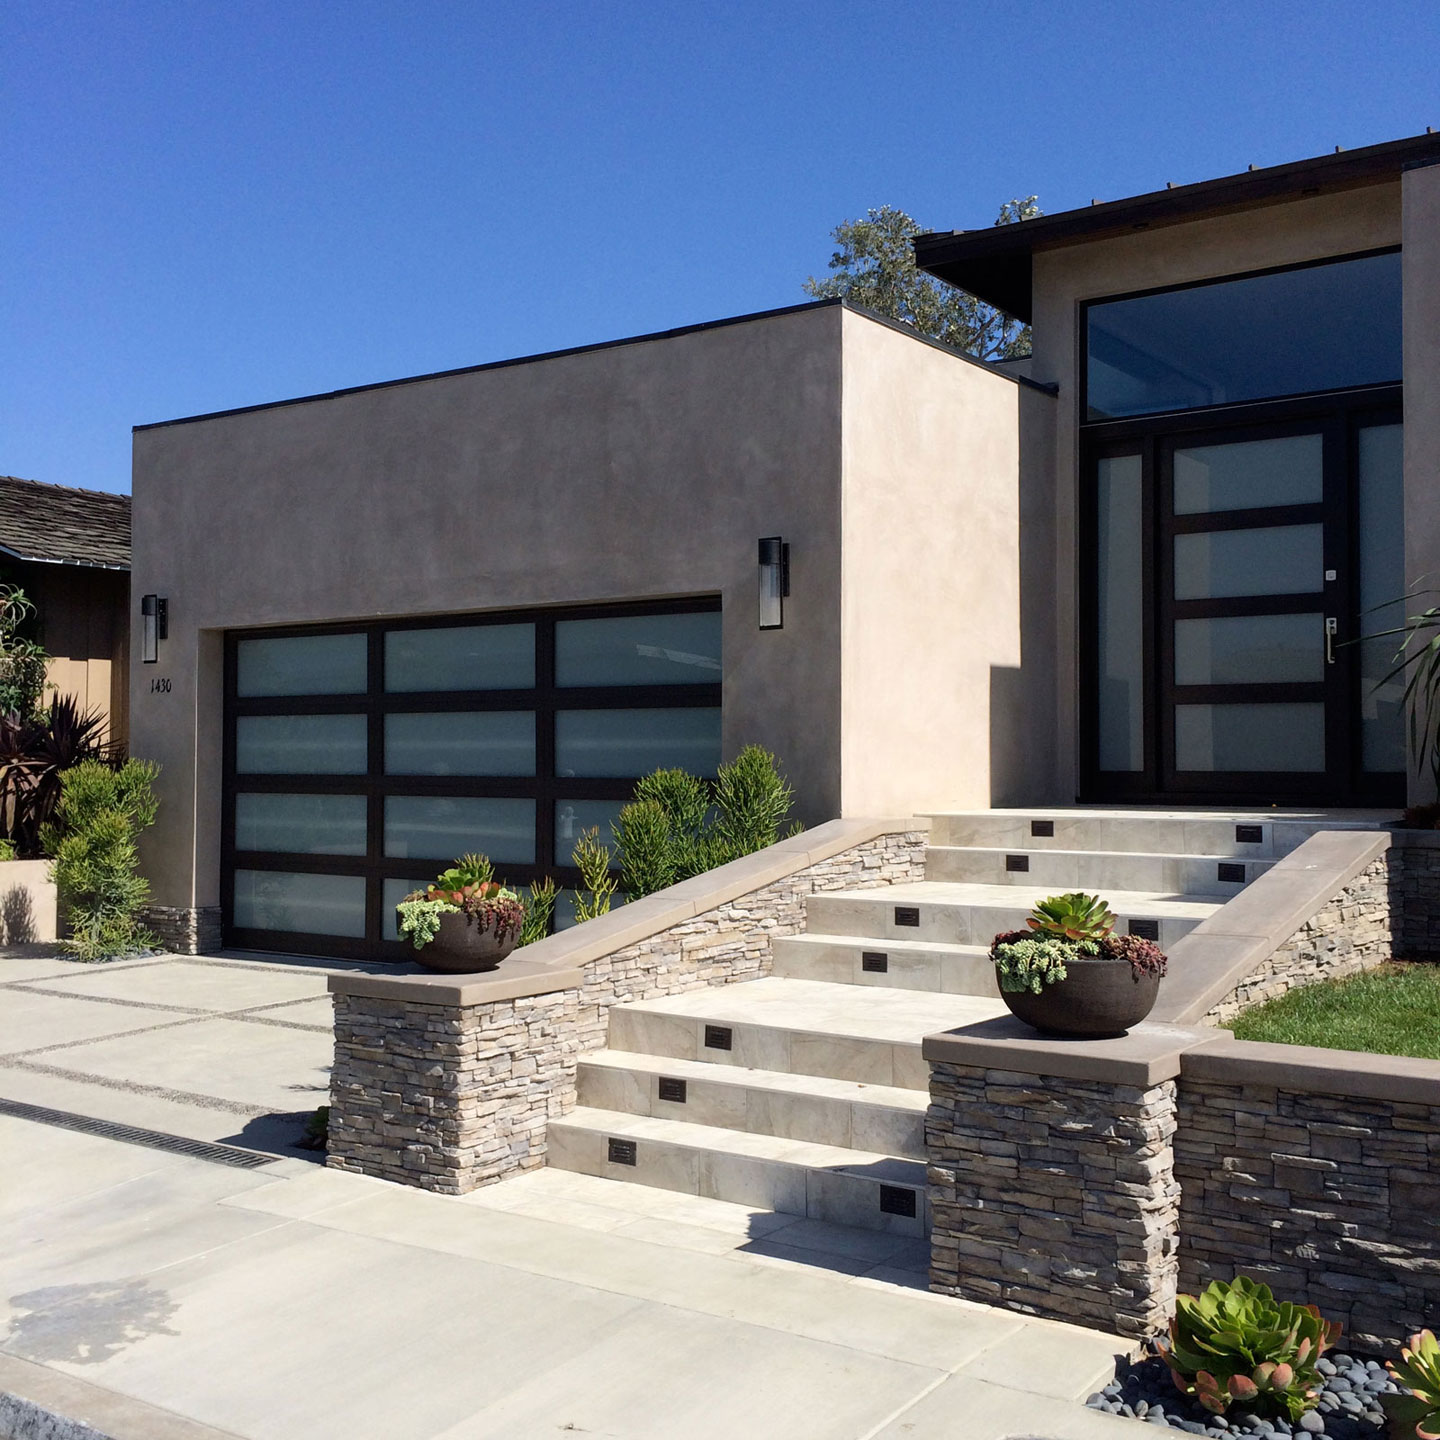 Modern Garage Using Beautiful Modern Garage Doors Design Using Glass Material Combined With Wooden Frame Decoration And Outdoor Staircase Ideas With Stone And Concrete Material Decoration Fascinating Modern Garage Doors Used In Remarkable Designs